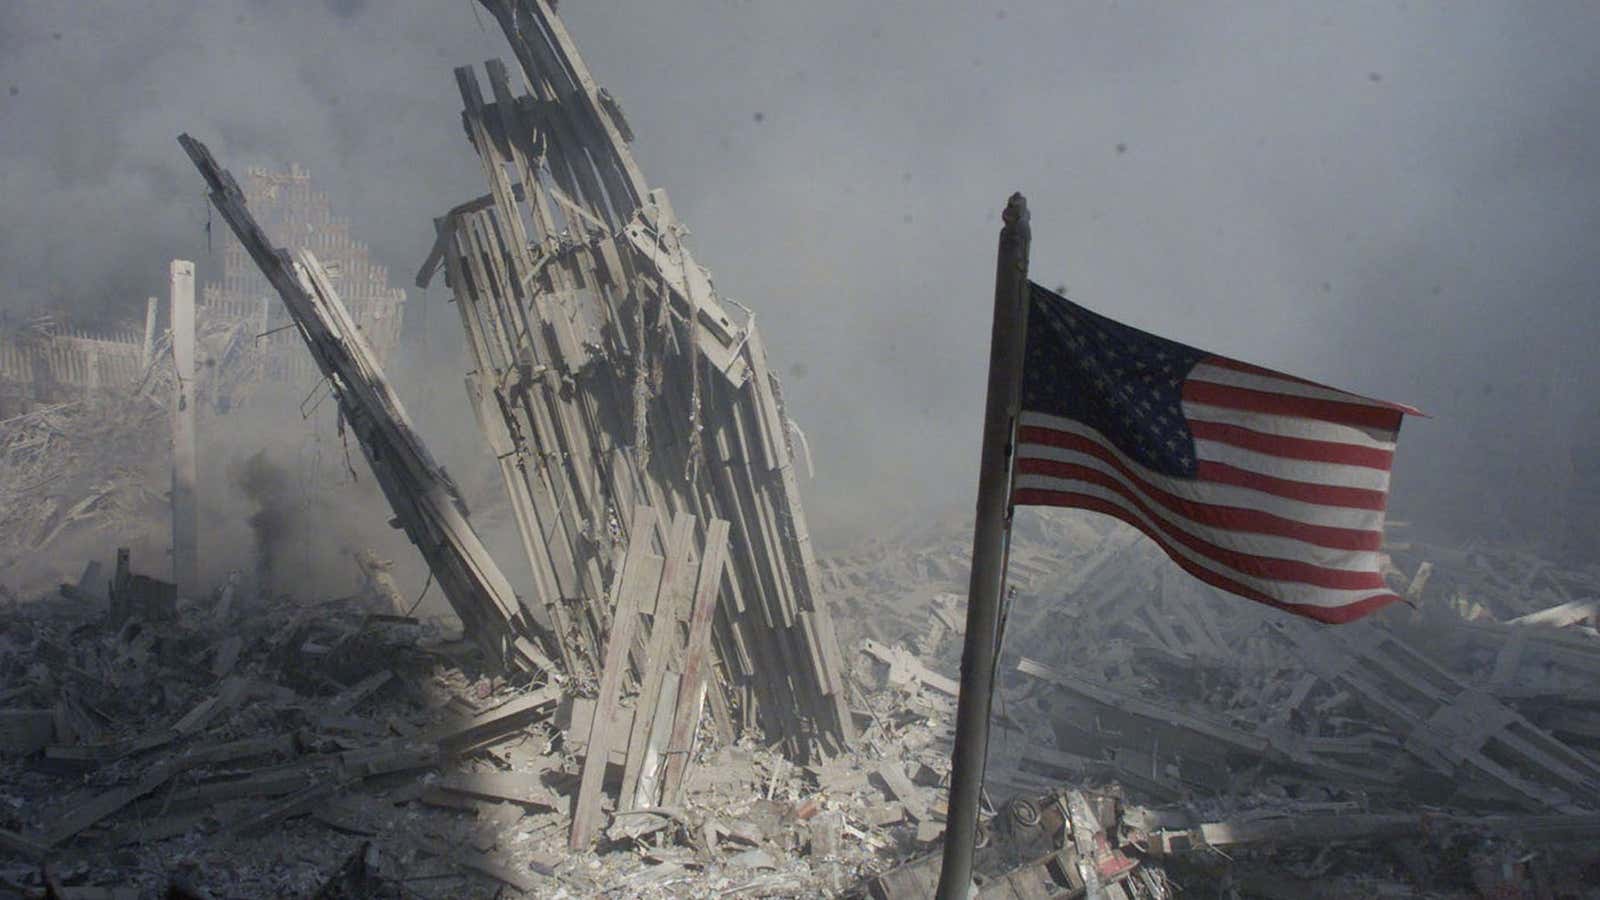 A flag at the base of the destroyed World Trade Center, on Sept. 11, 2001.